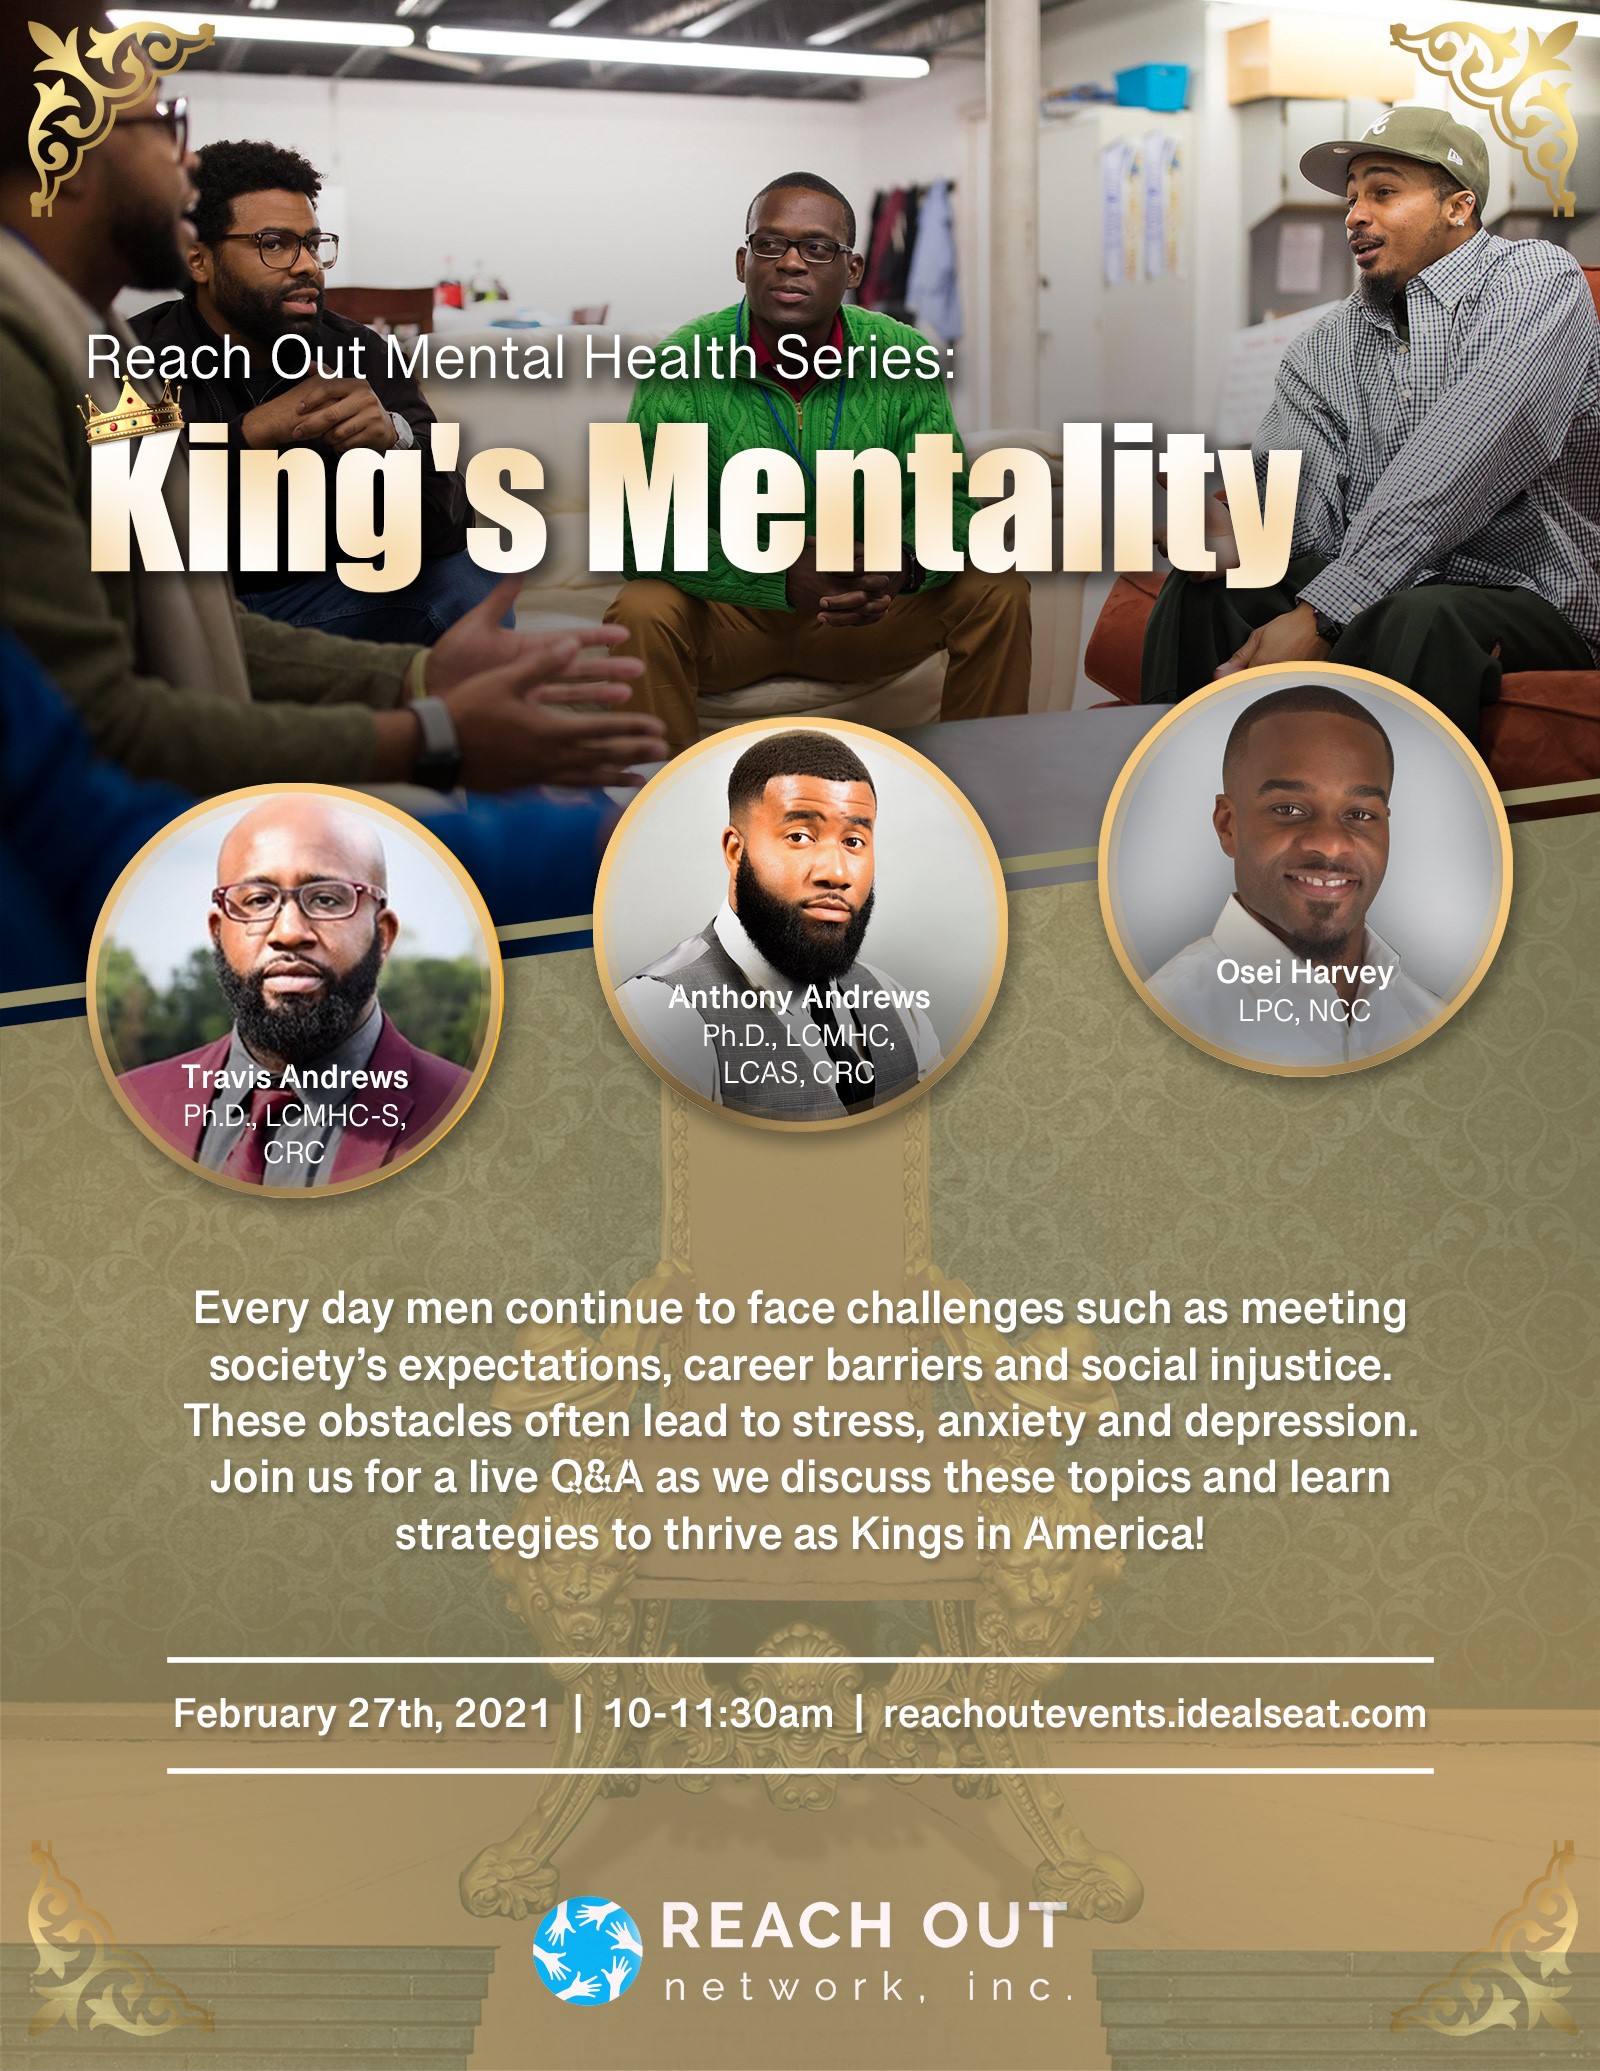 Reach Out Network Mental Health Series - King's Mentality